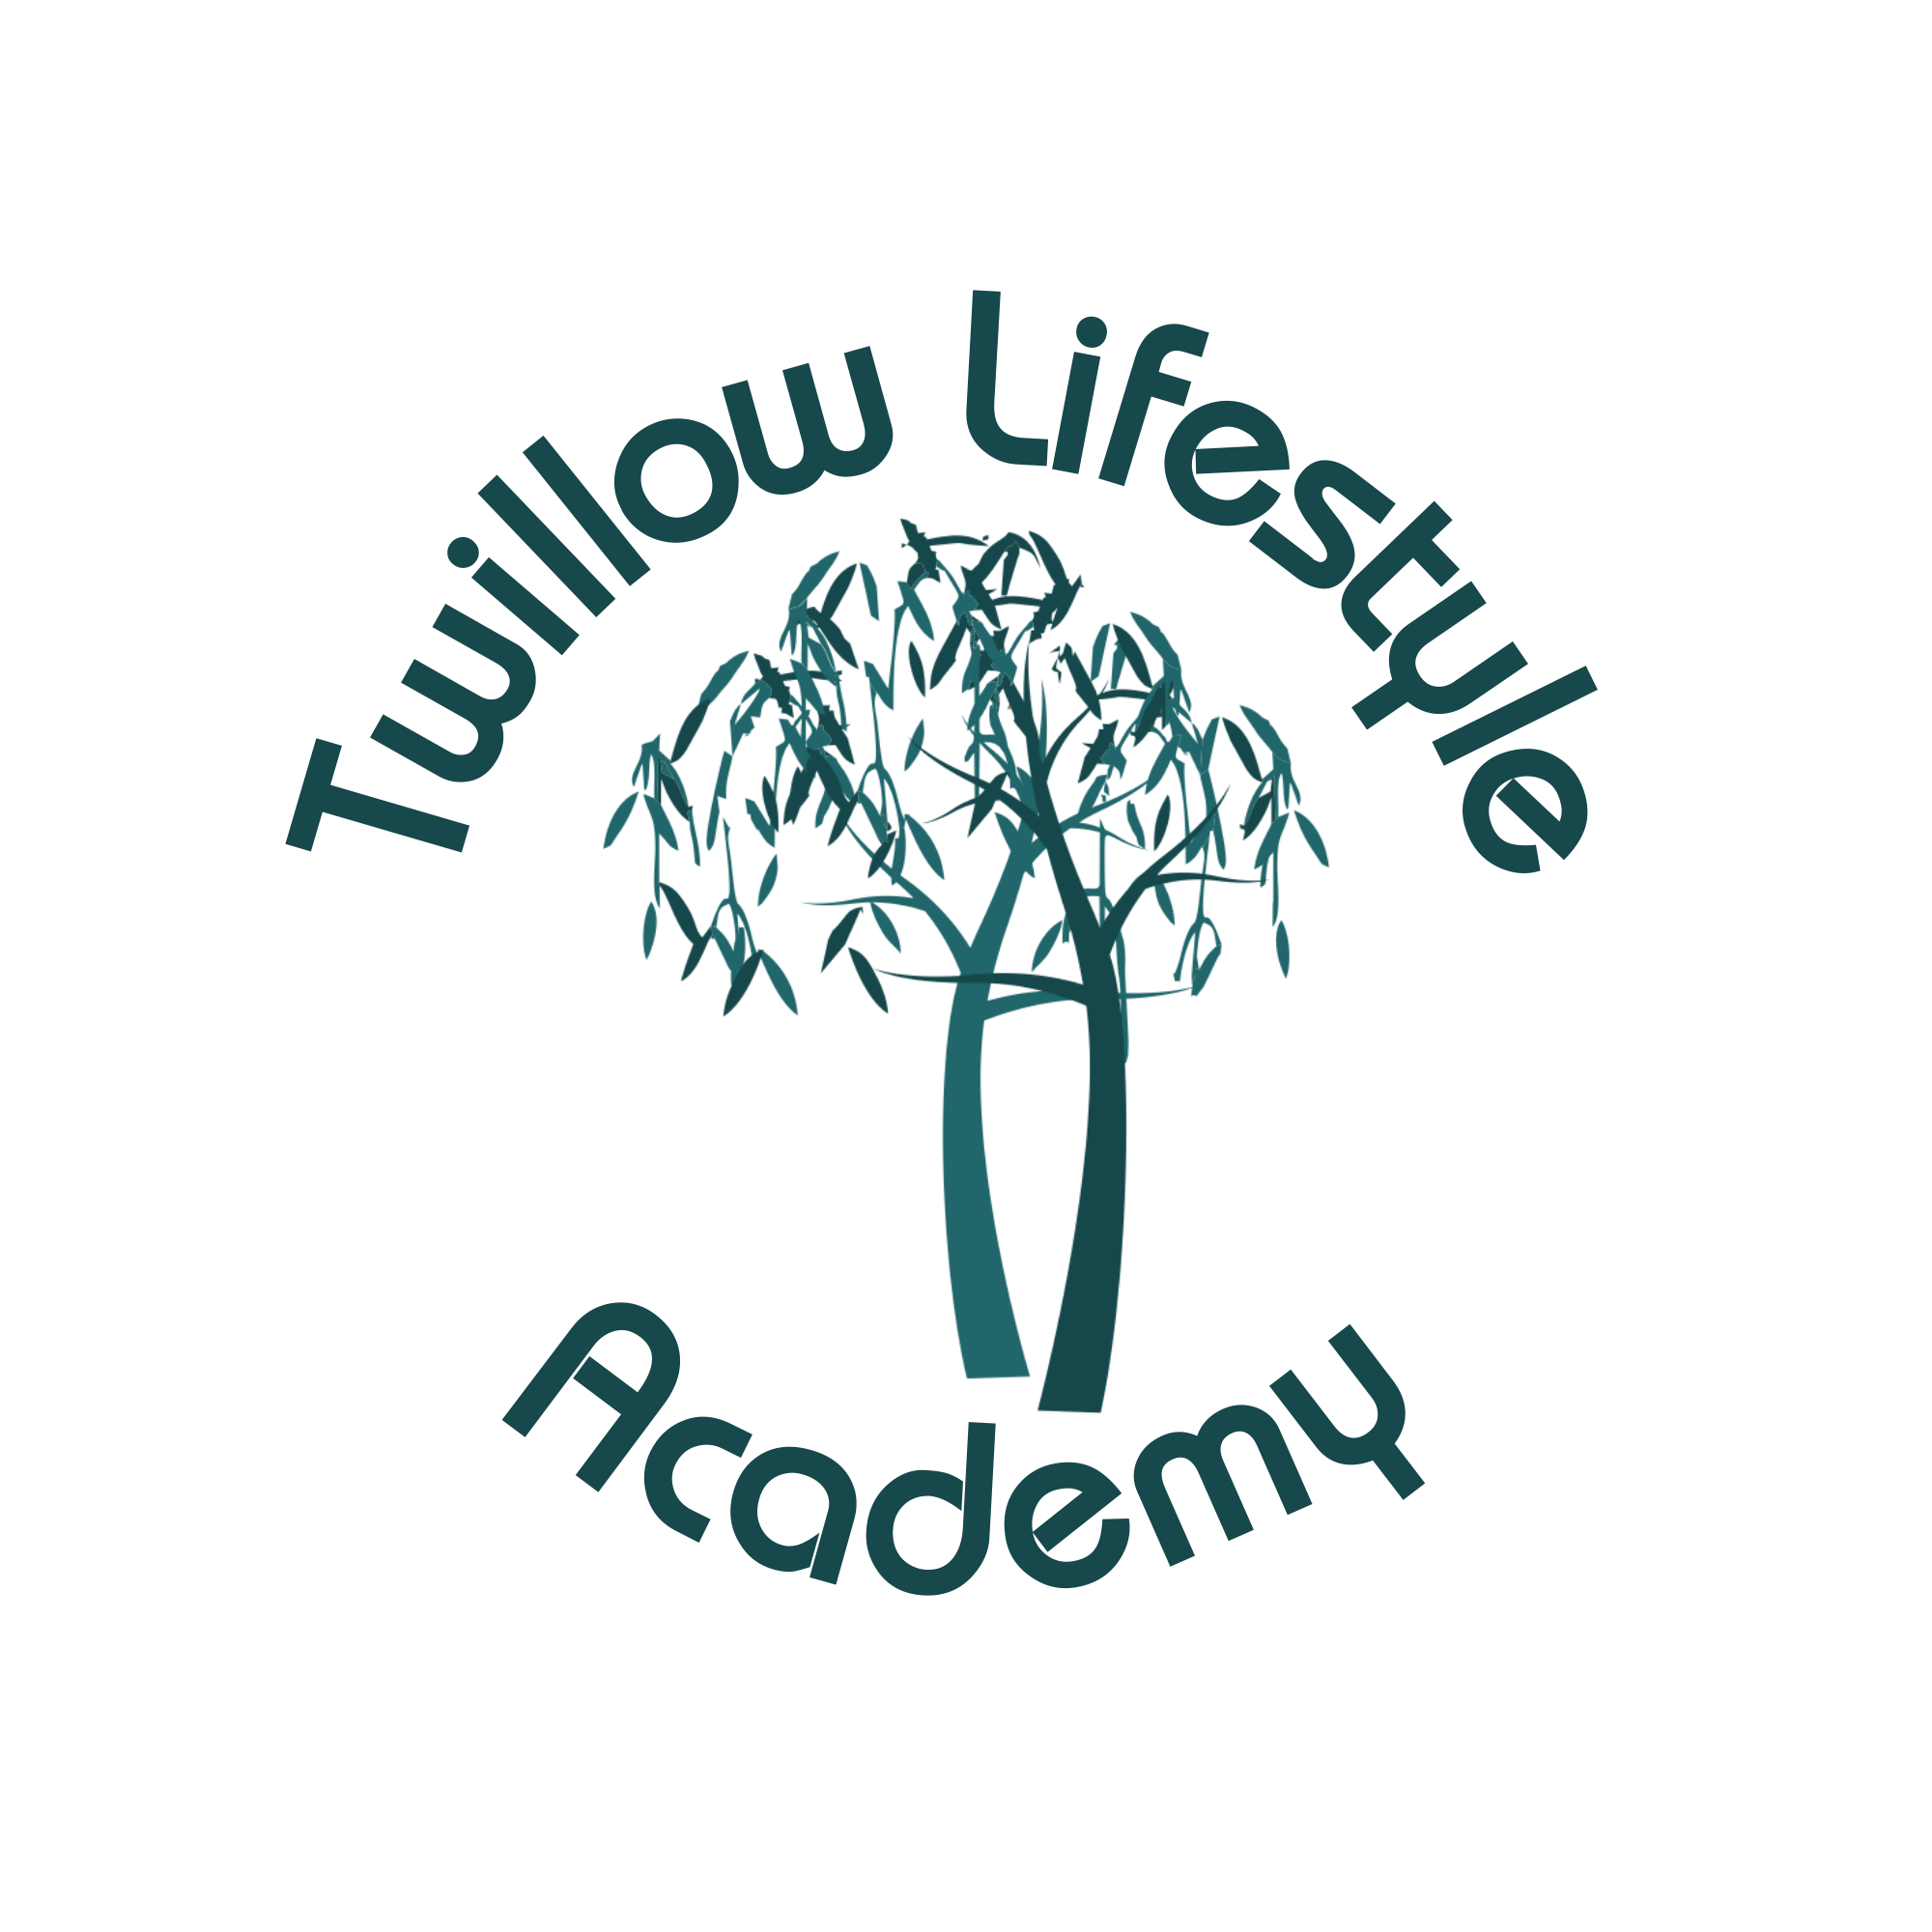 Copy of New Twillow Lifestyle Academy3 (2000 × 2000 px)-2